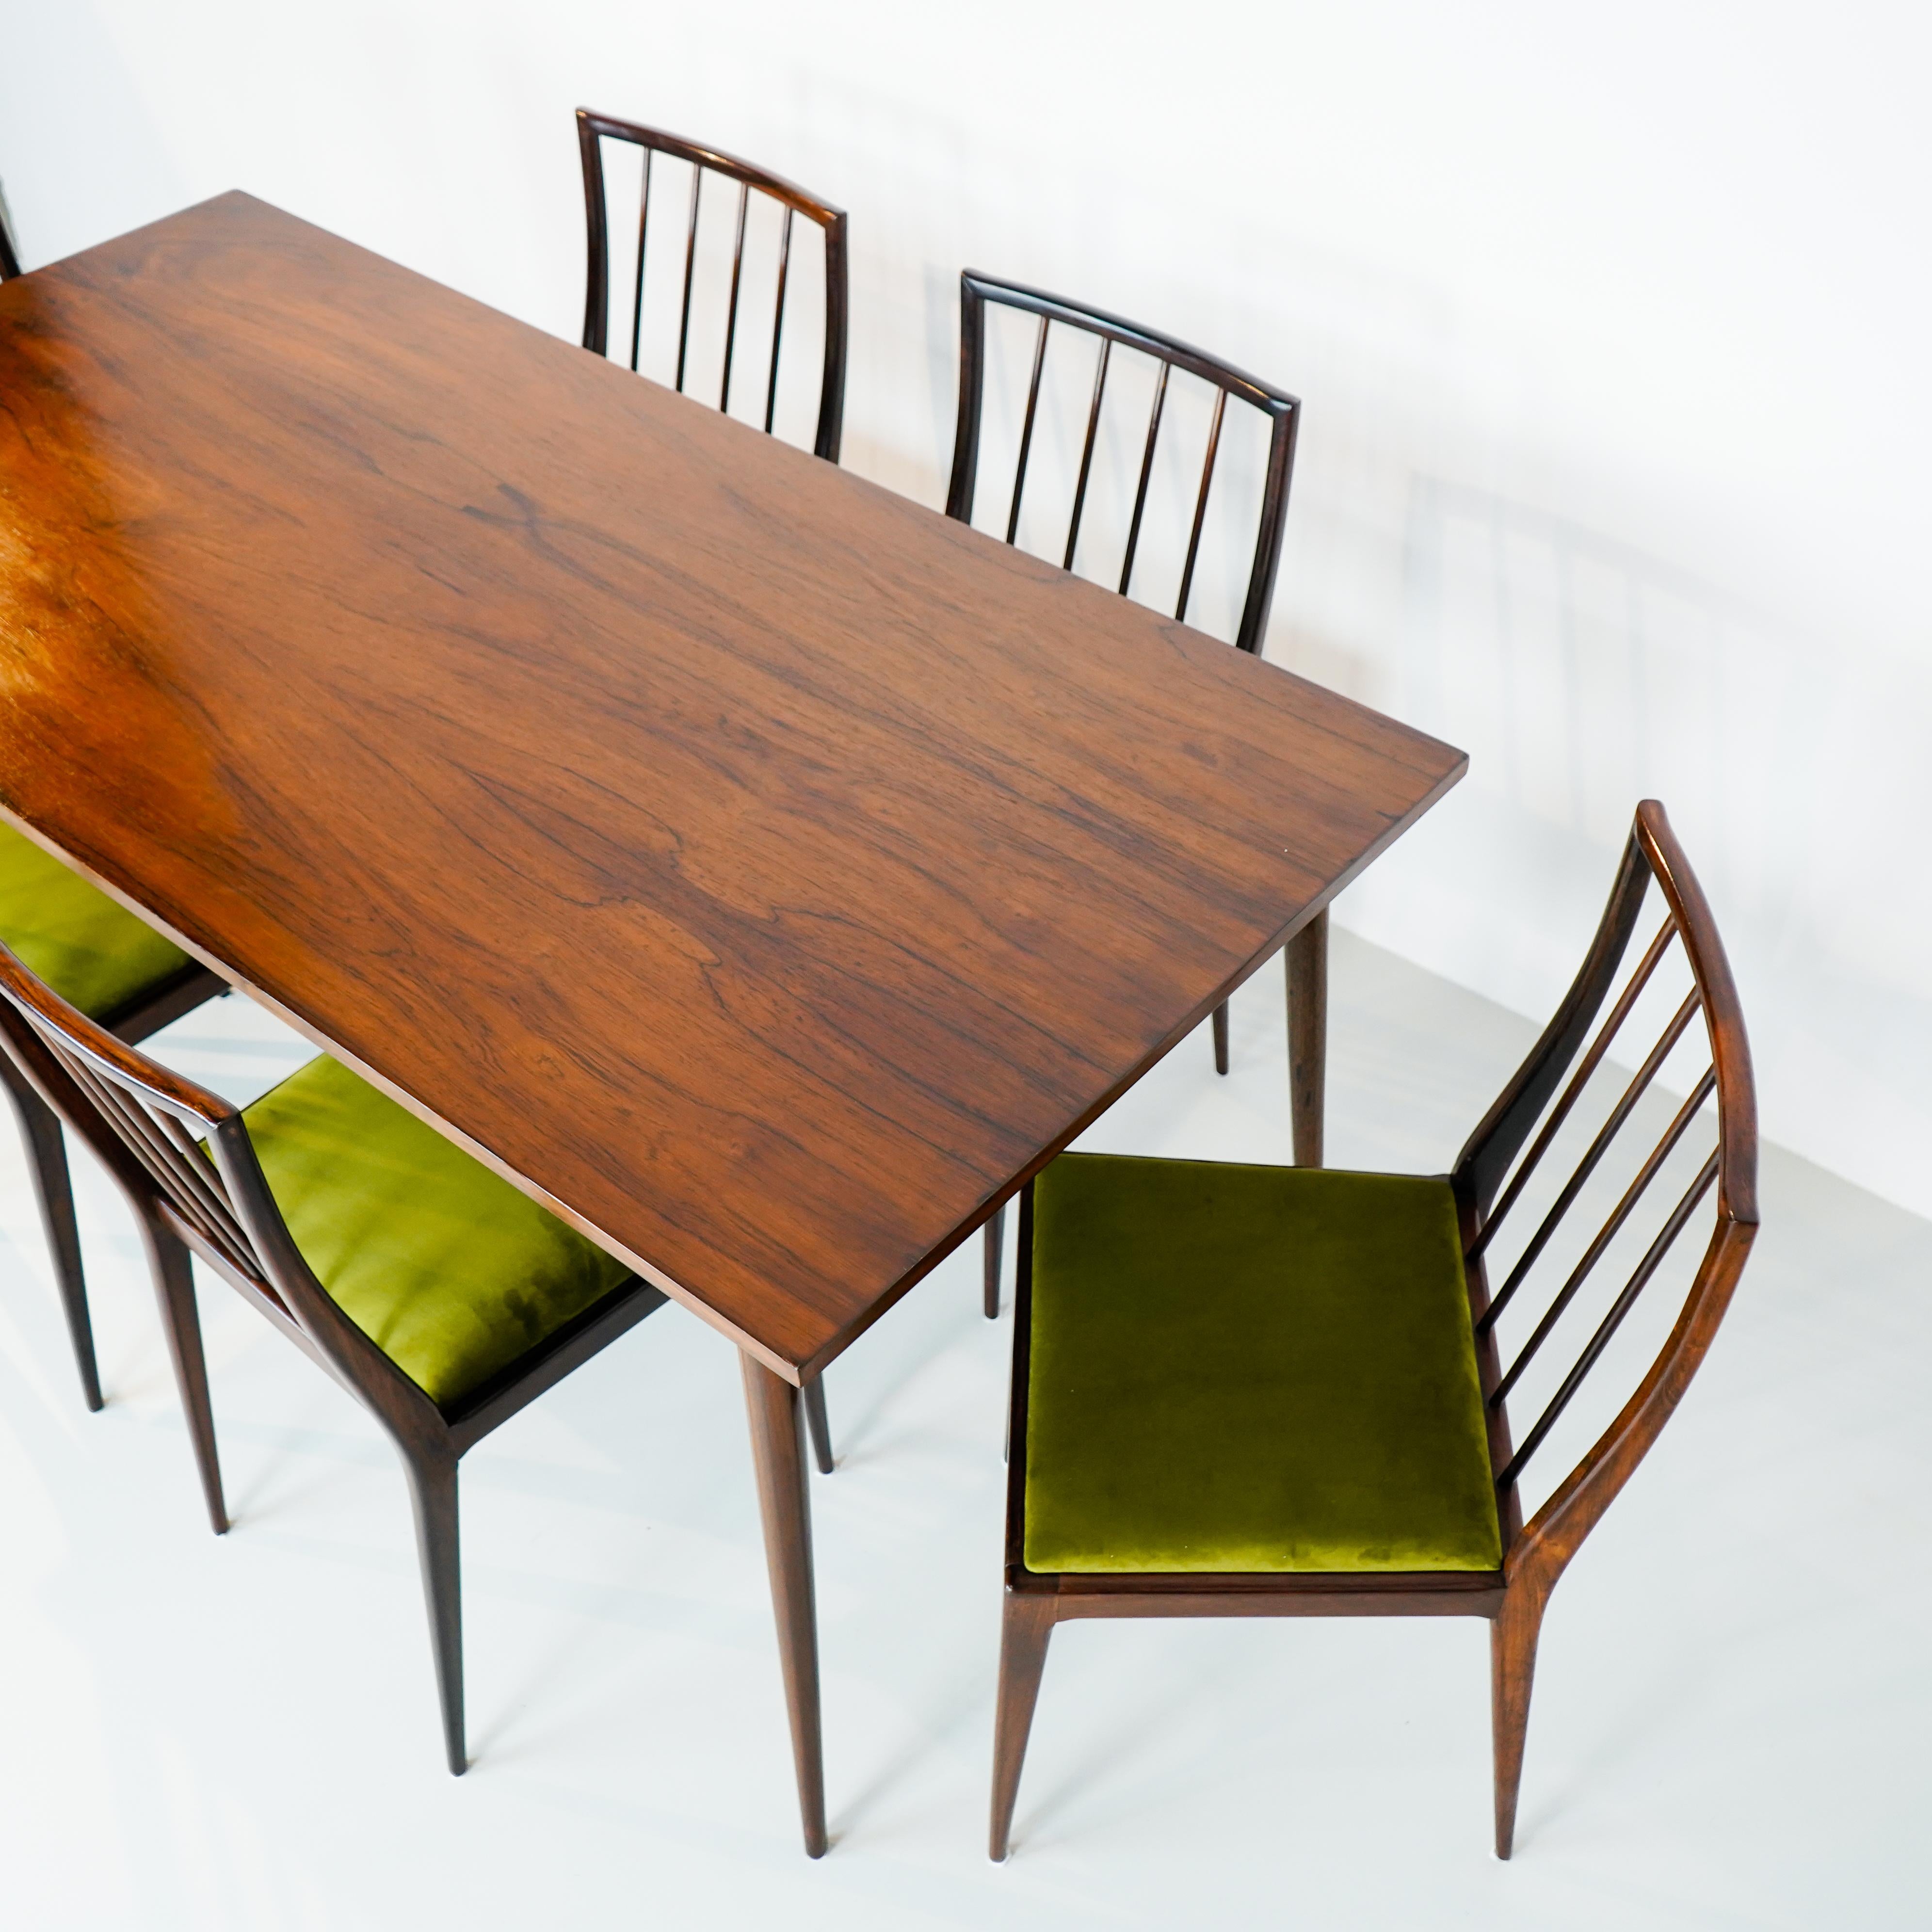 GB01 RIPAS - 6 chairs and sealed table in Rosewood, Geraldo de Barro Unilabor For Sale 2